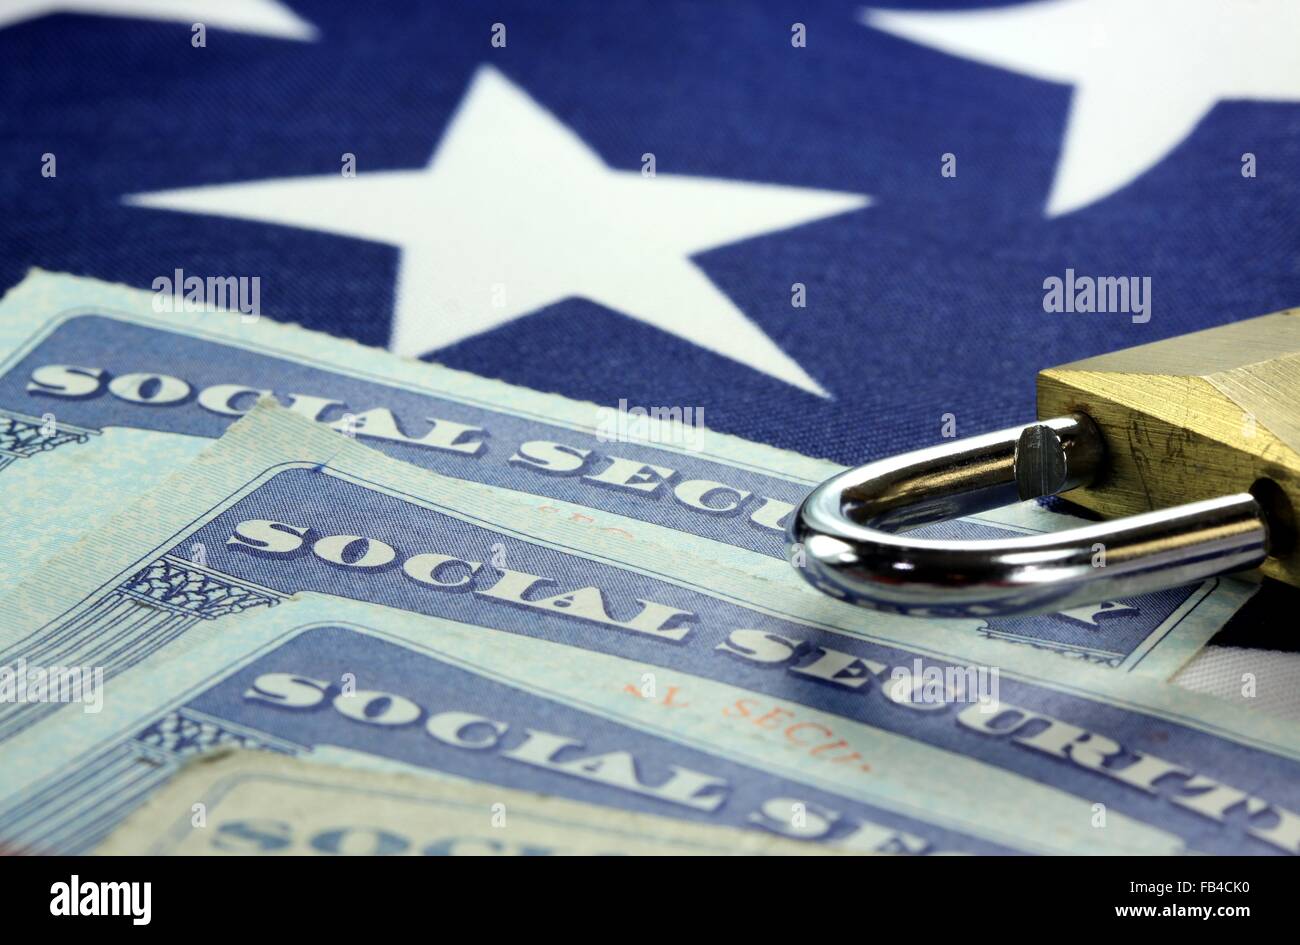 Padlock and social security card - Identity theft and identity protection concept Stock Photo